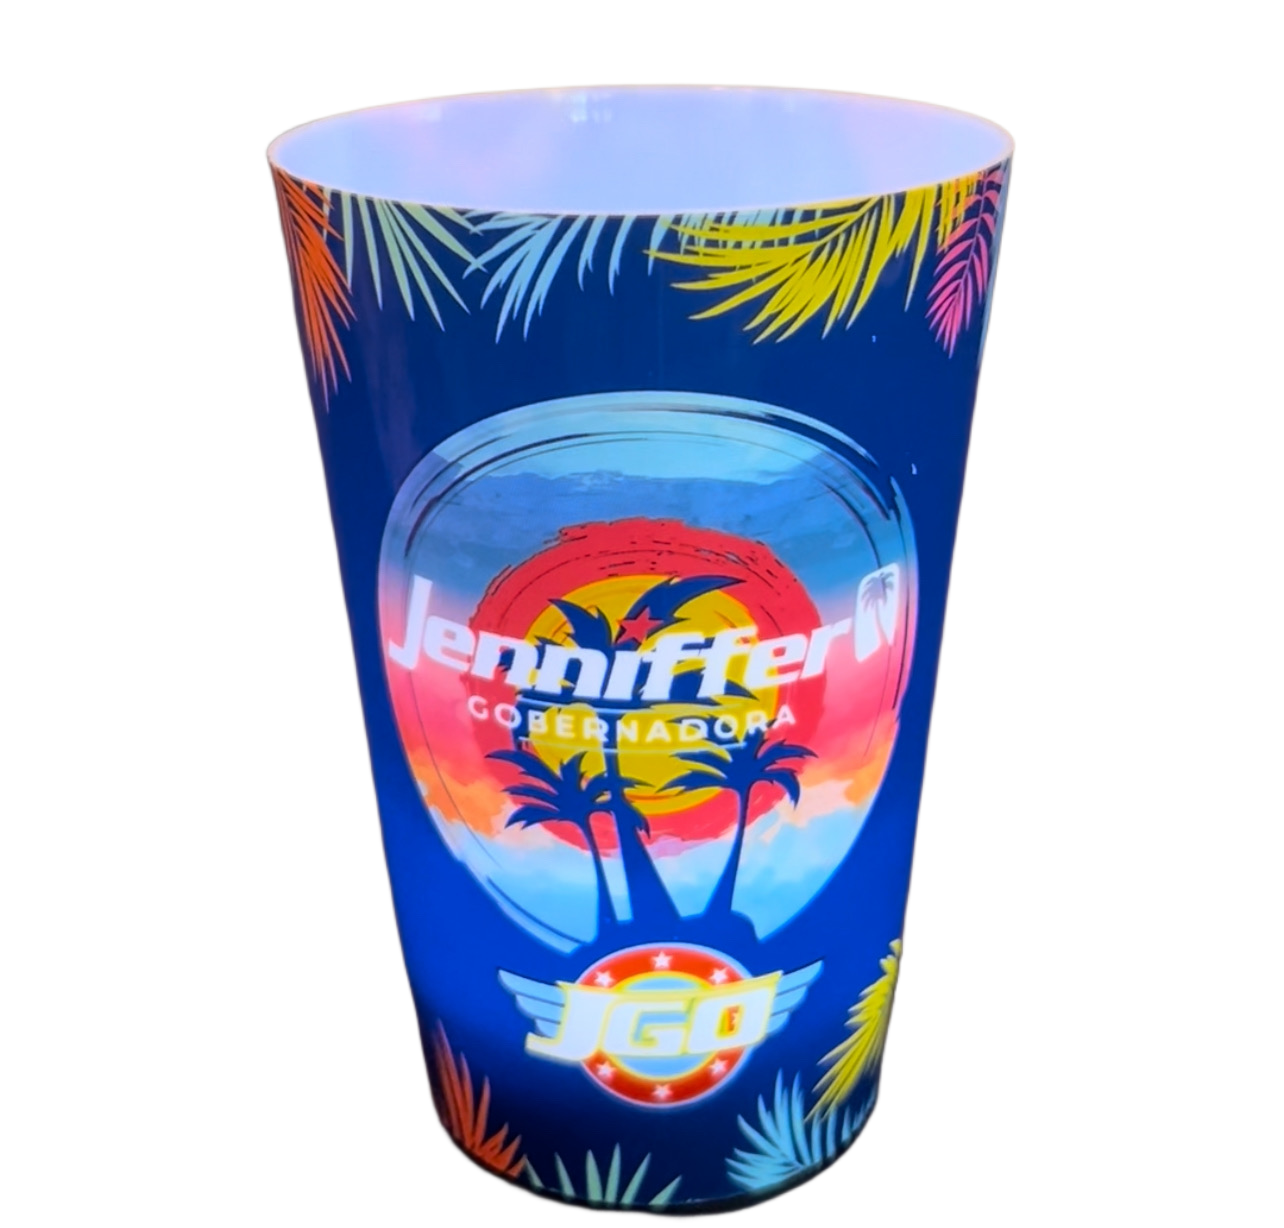 LIMITED OFFER: GET 1 BEACH BALL WITH THE PURCHASE OF 2 JGO SUNSET LED LIGHT UP 16 OZ  CUPS